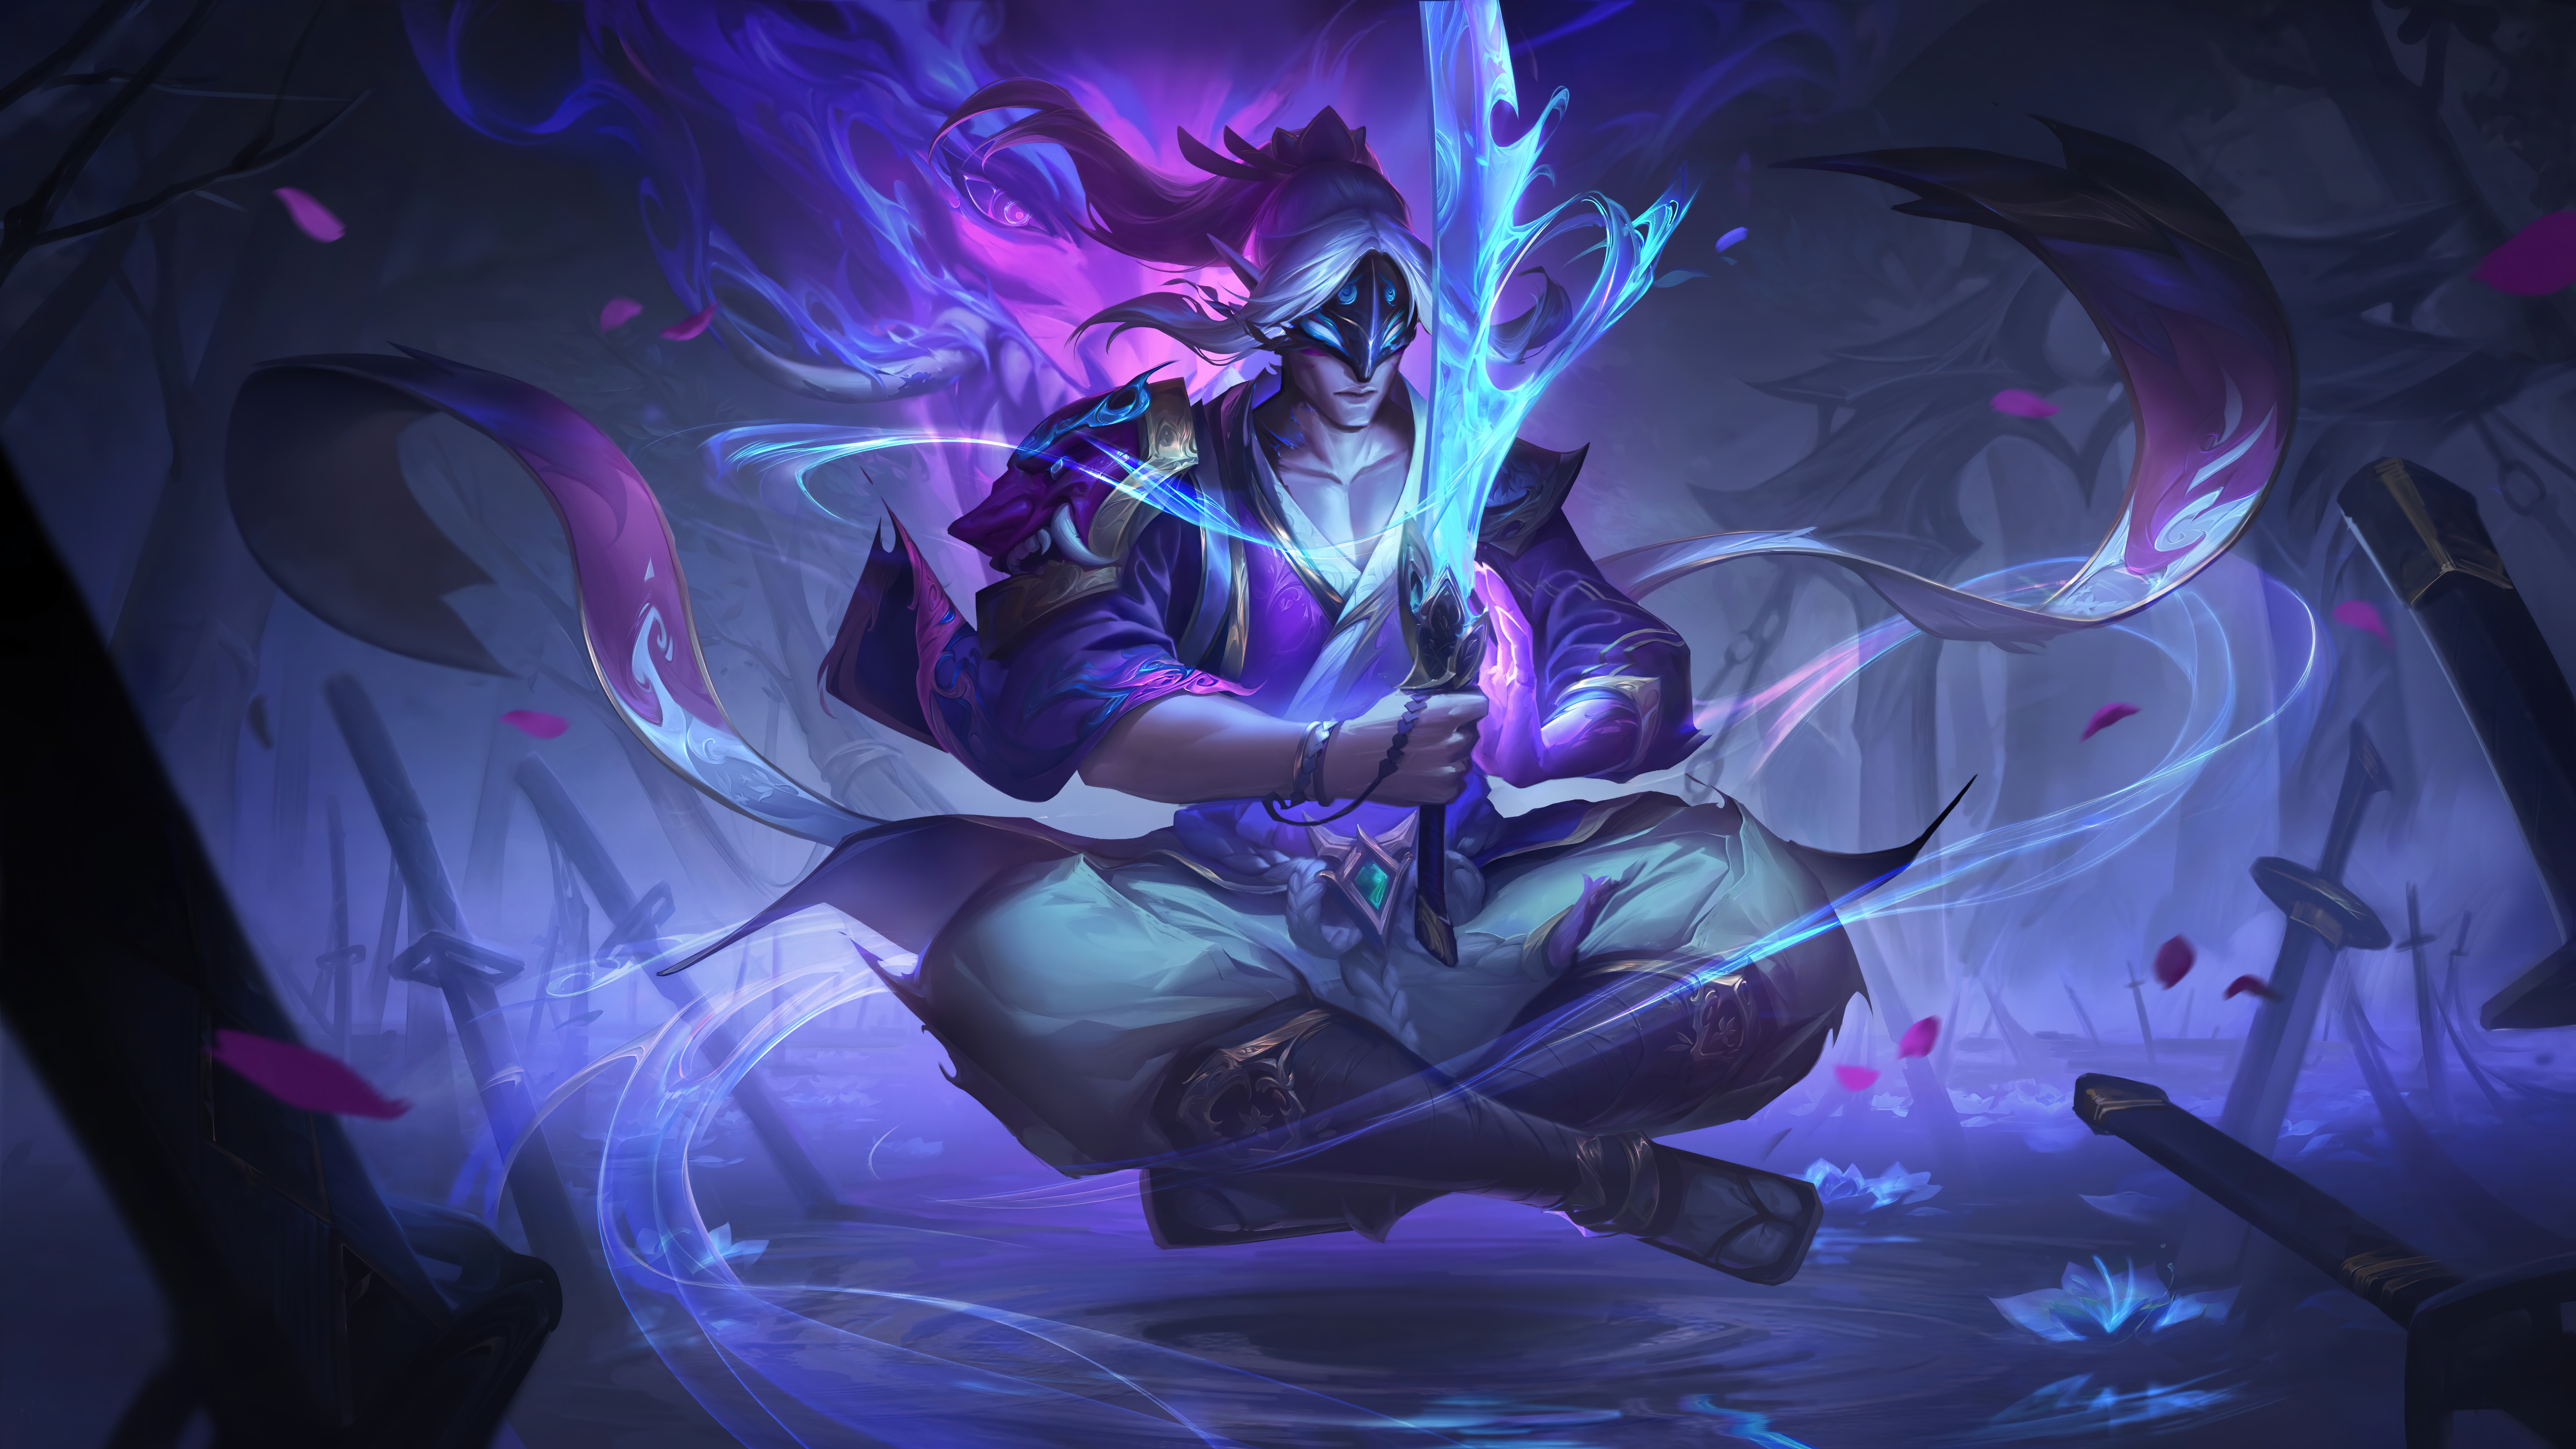 General 7680x4320 Master Yi master yi (league of legends) spirit blossom League of Legends digital art Riot Games GZG 4K video games video game characters